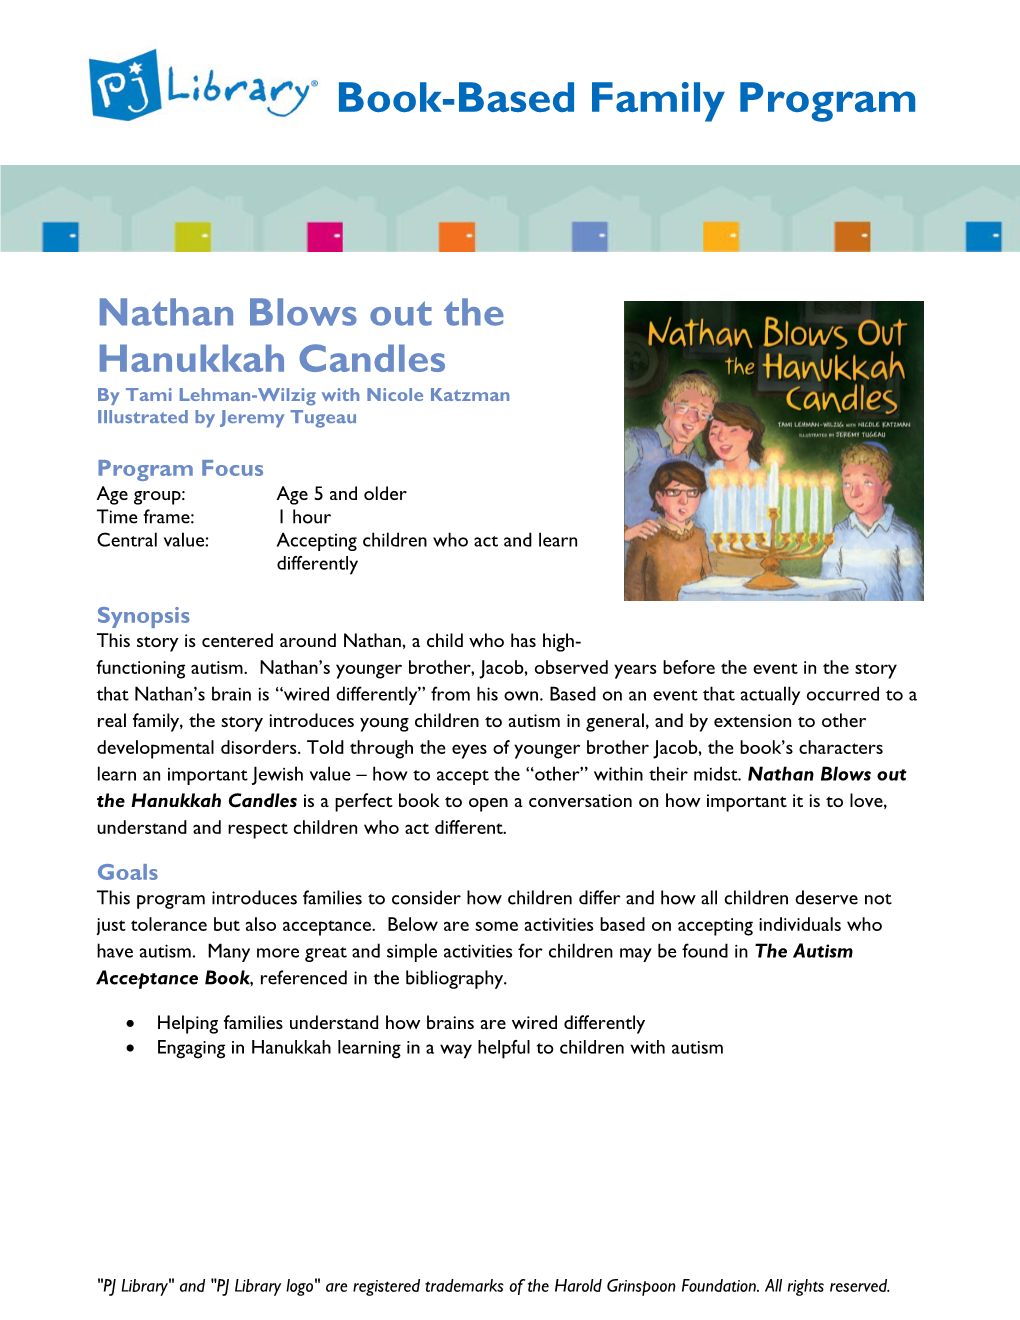 Nathan Blows out the Hanukkah Candles by Tami Lehman-Wilzig with Nicole Katzman Illustrated by Jeremy Tugeau